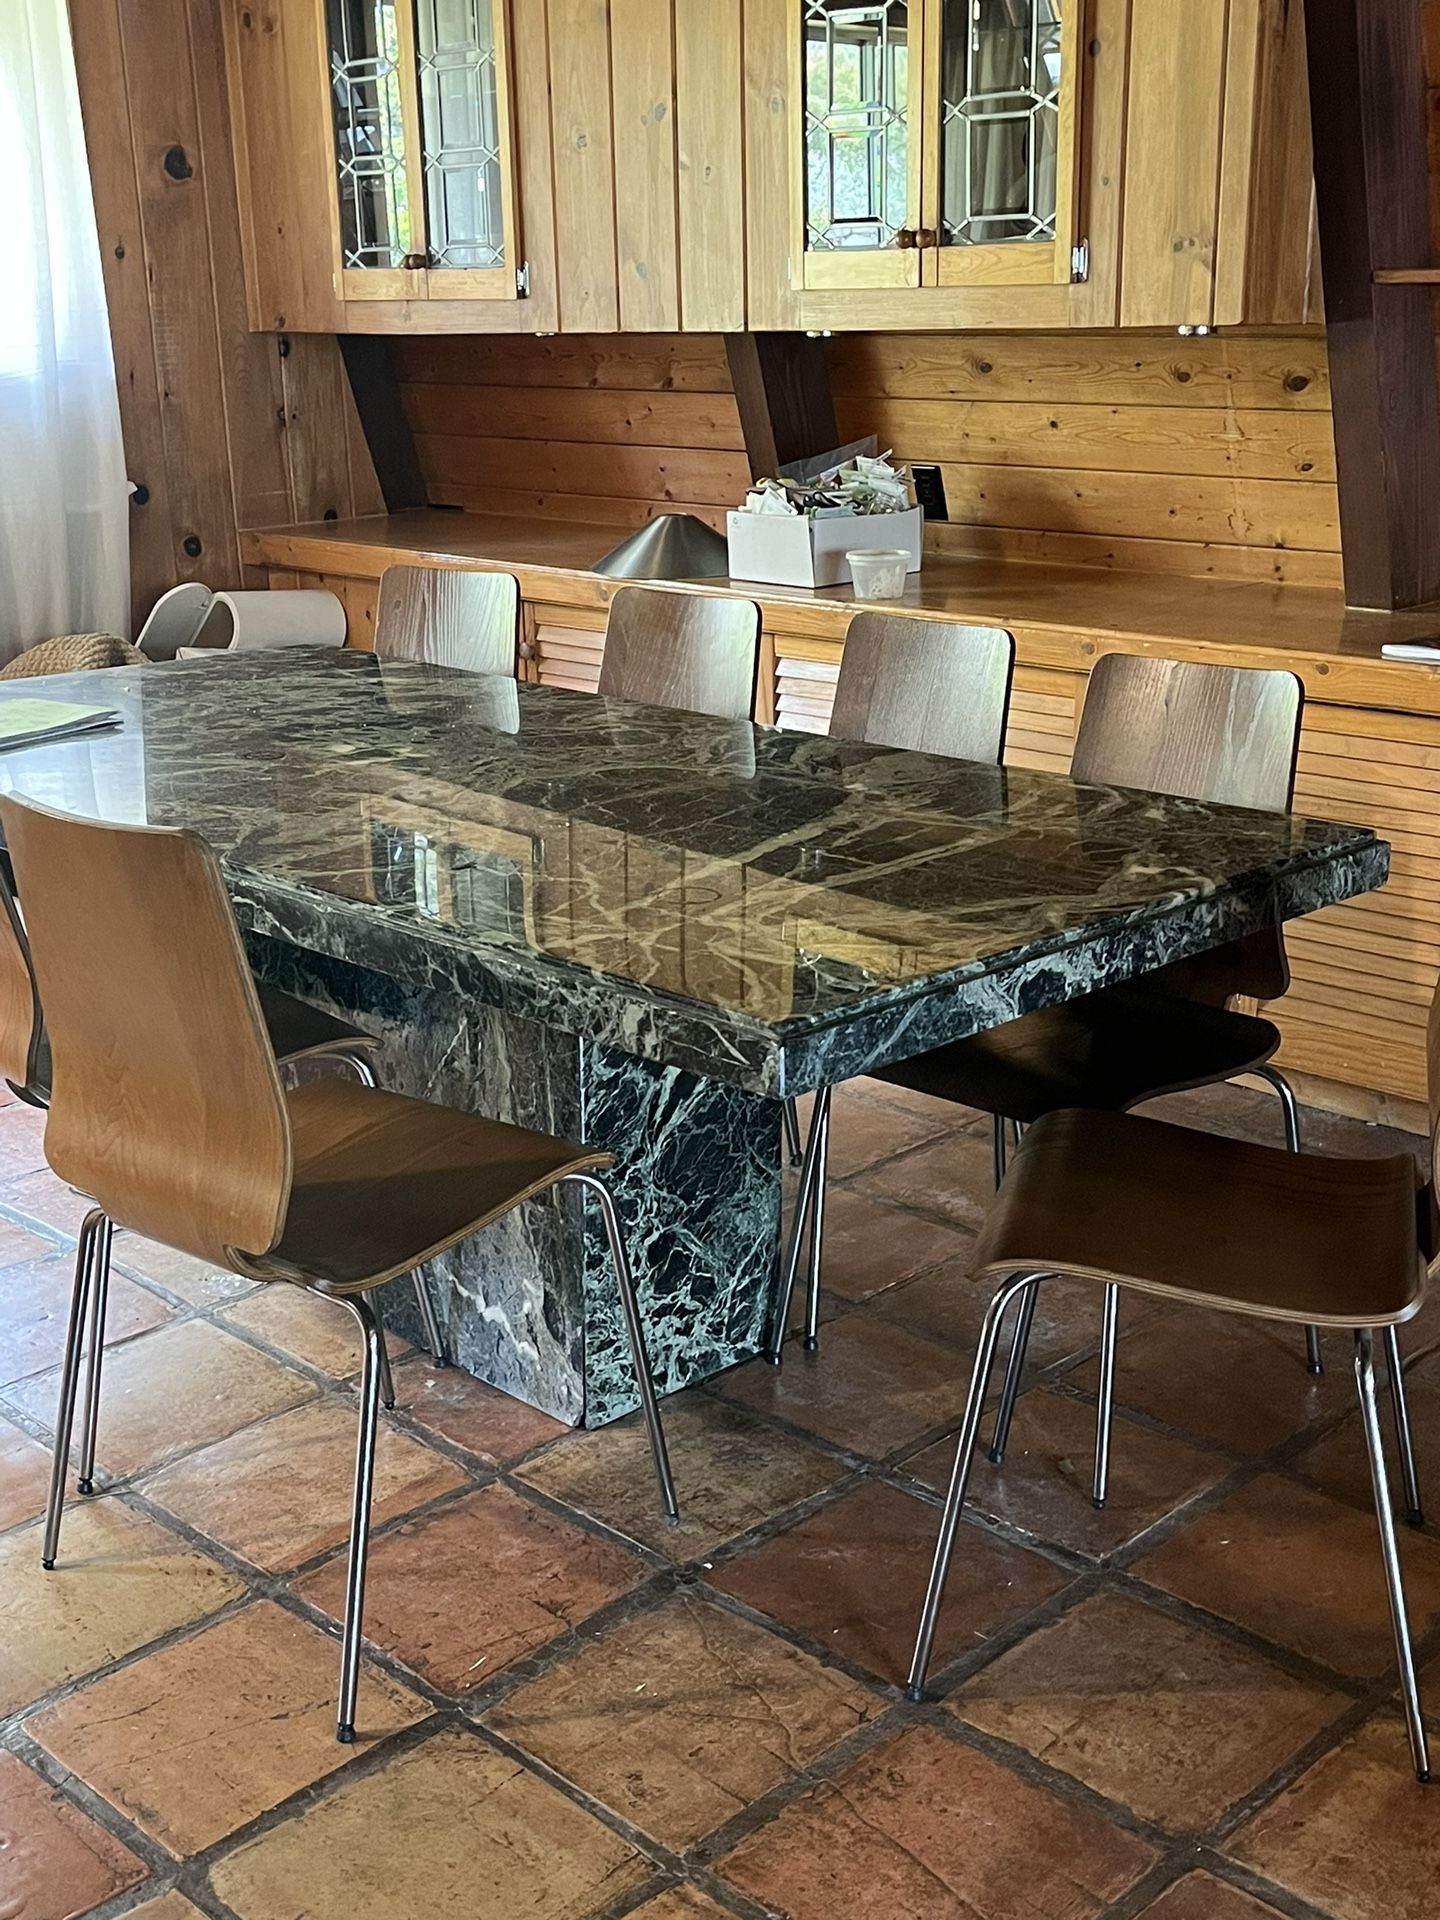 GREEN MARBLE TABLE